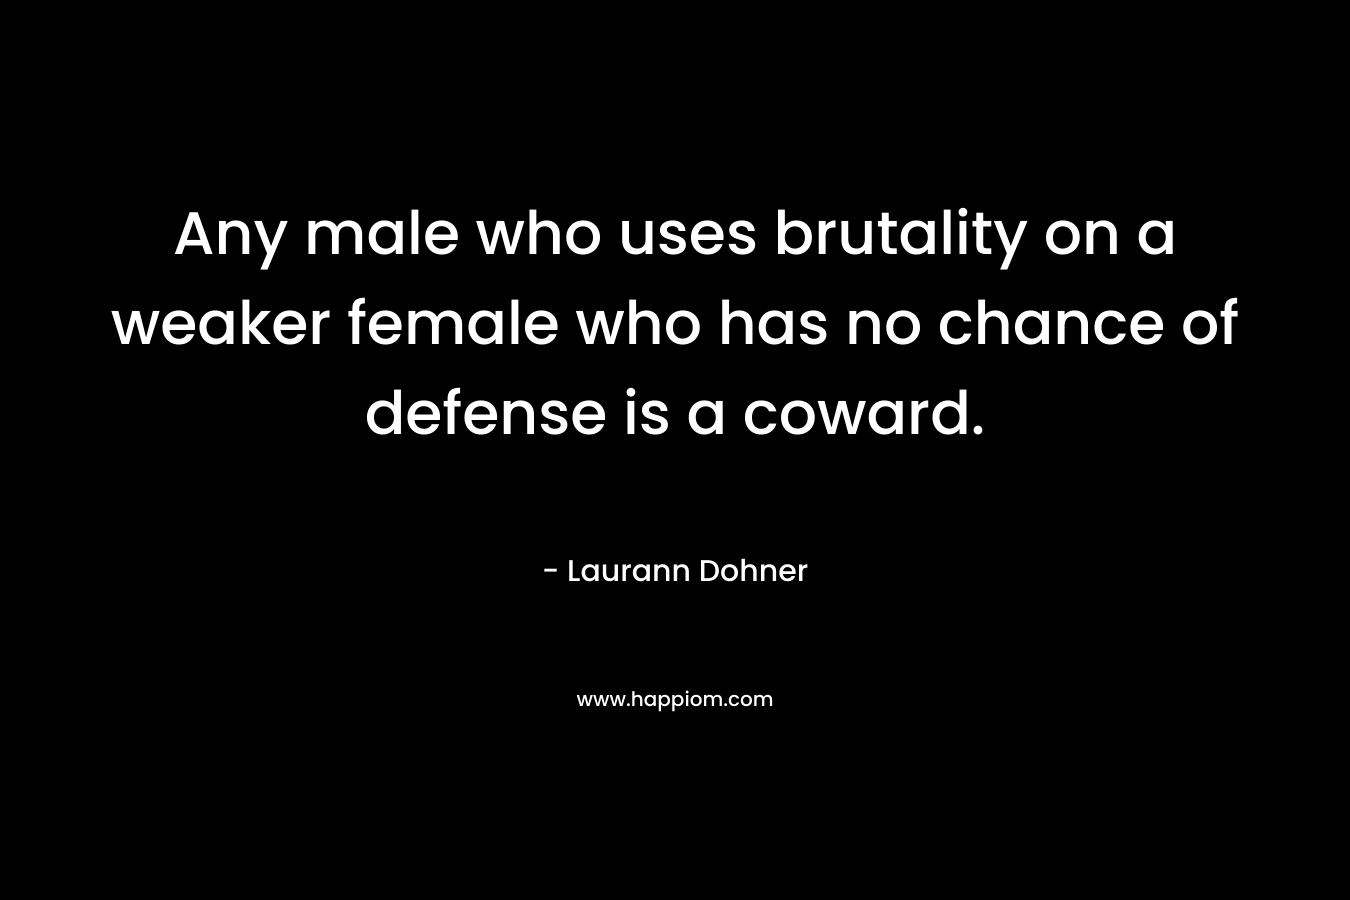 Any male who uses brutality on a weaker female who has no chance of defense is a coward. – Laurann Dohner